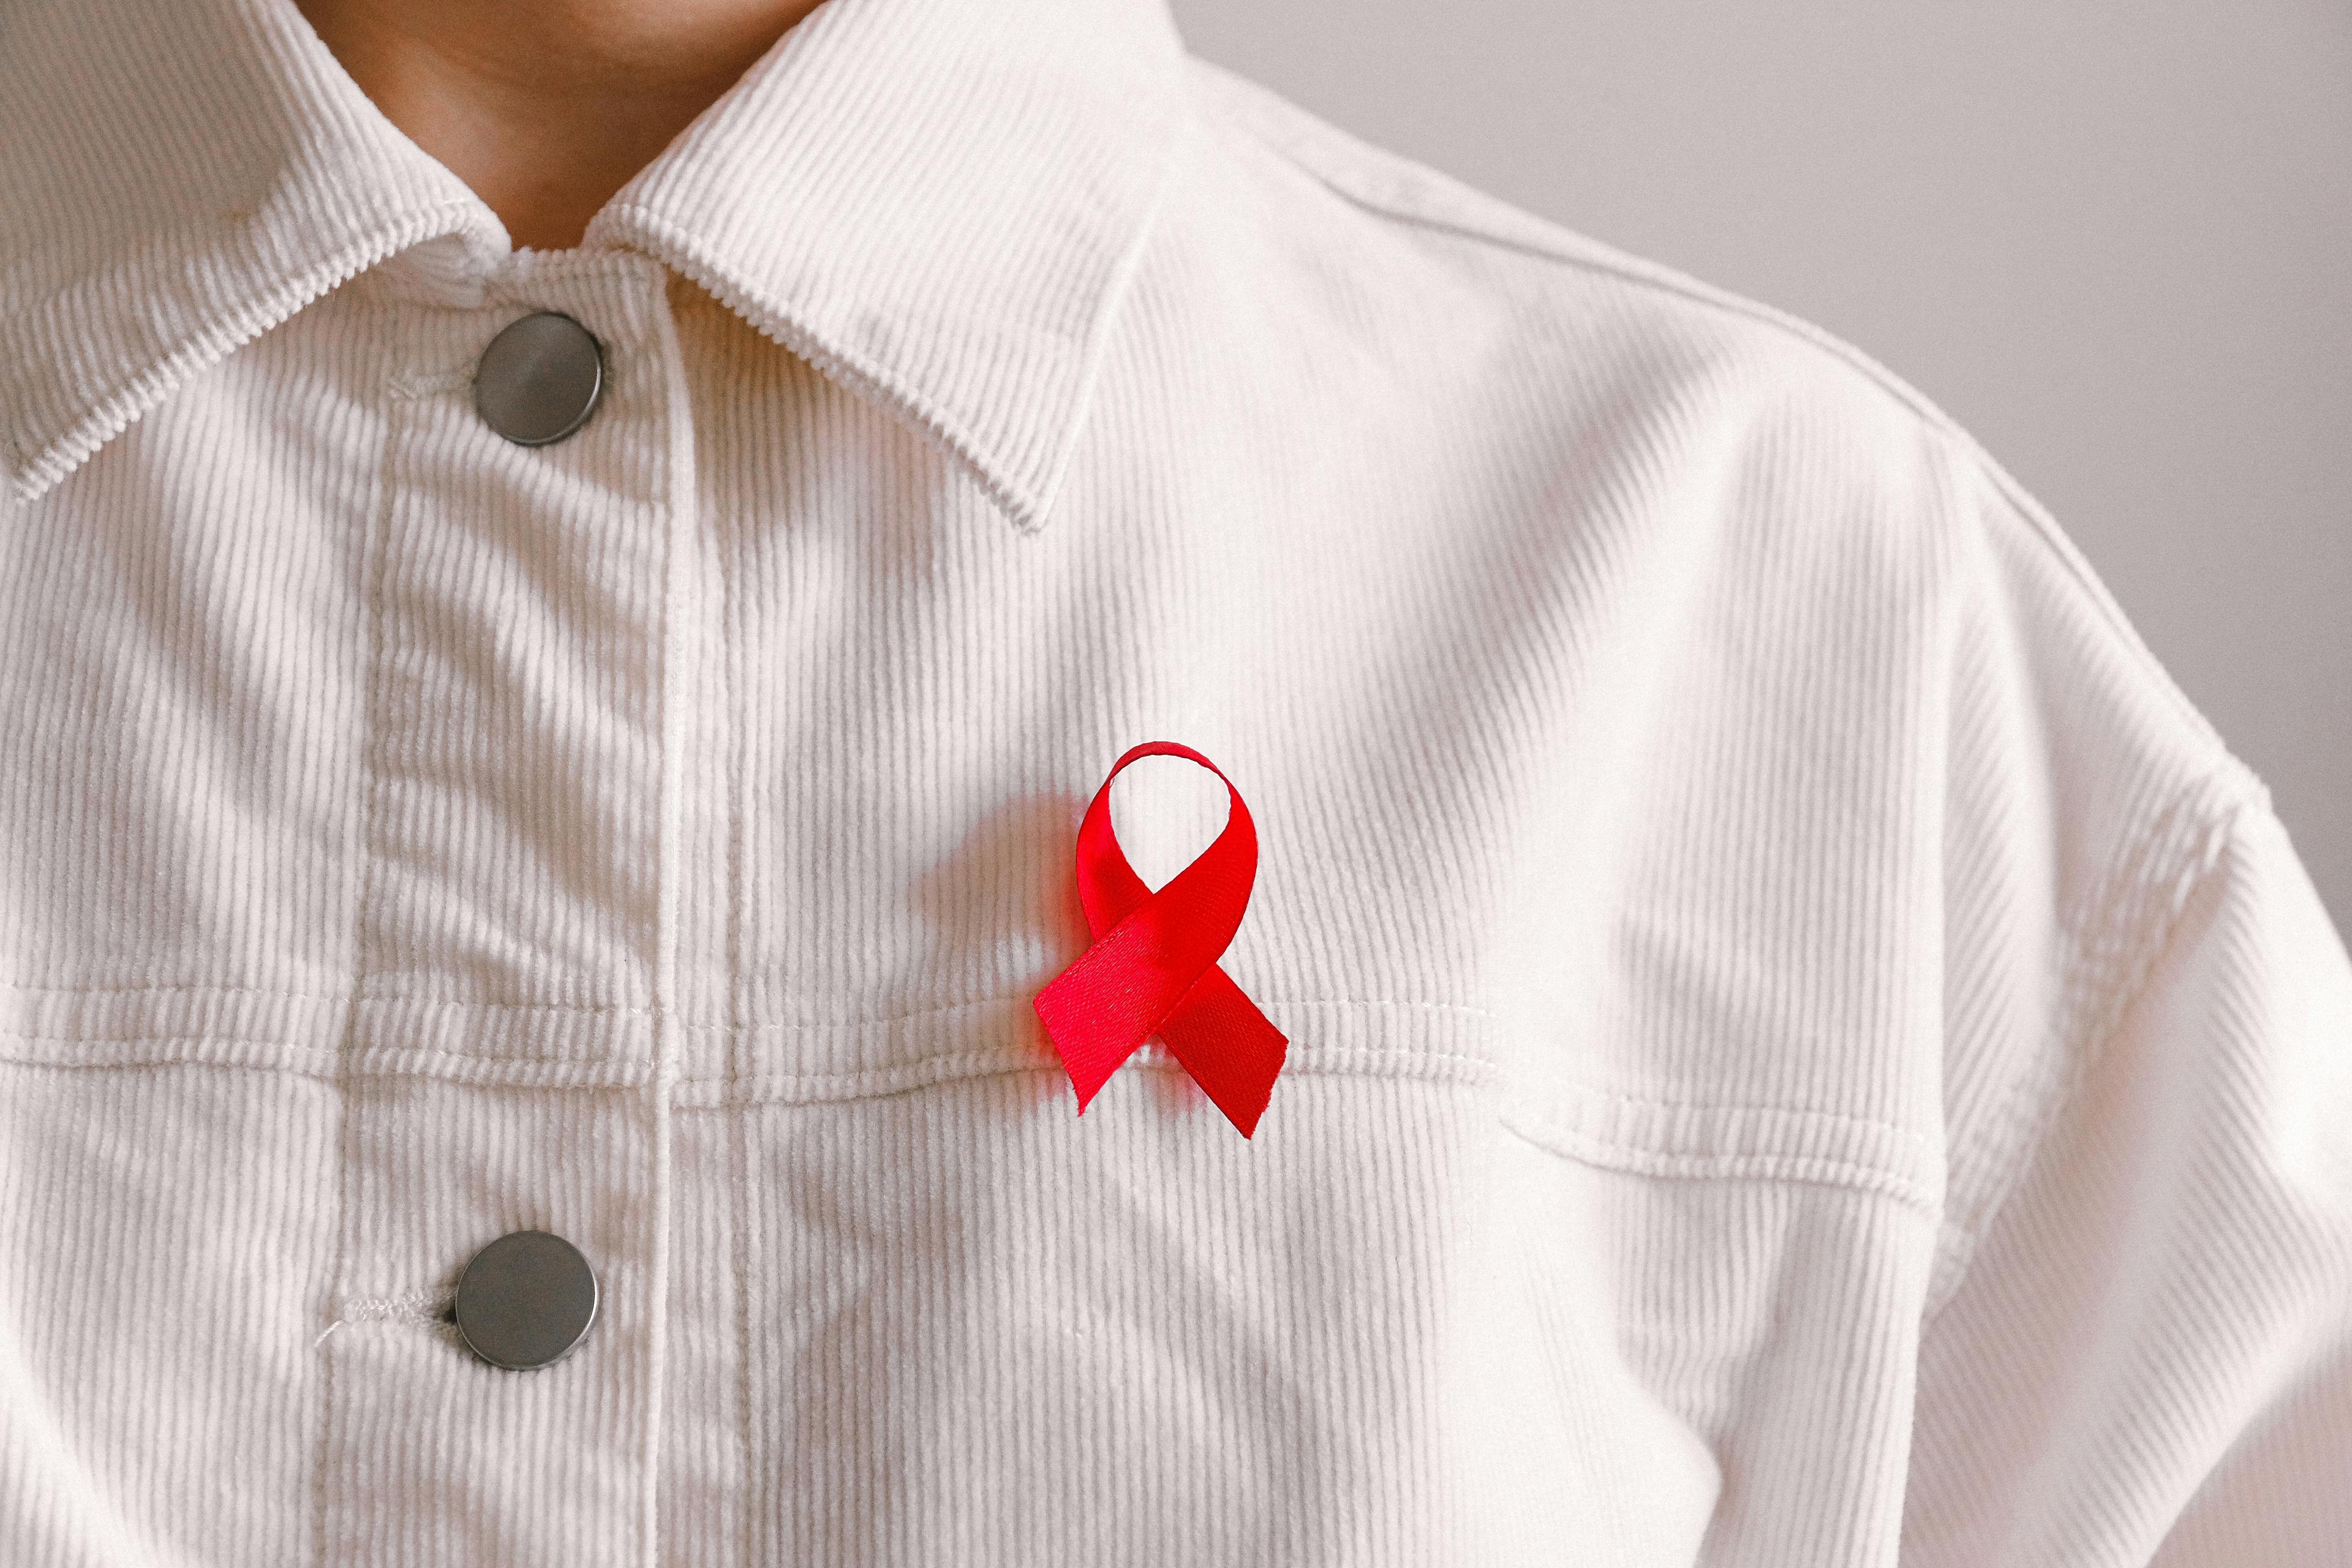 Beating HIV may soon be a reality with a vaccine